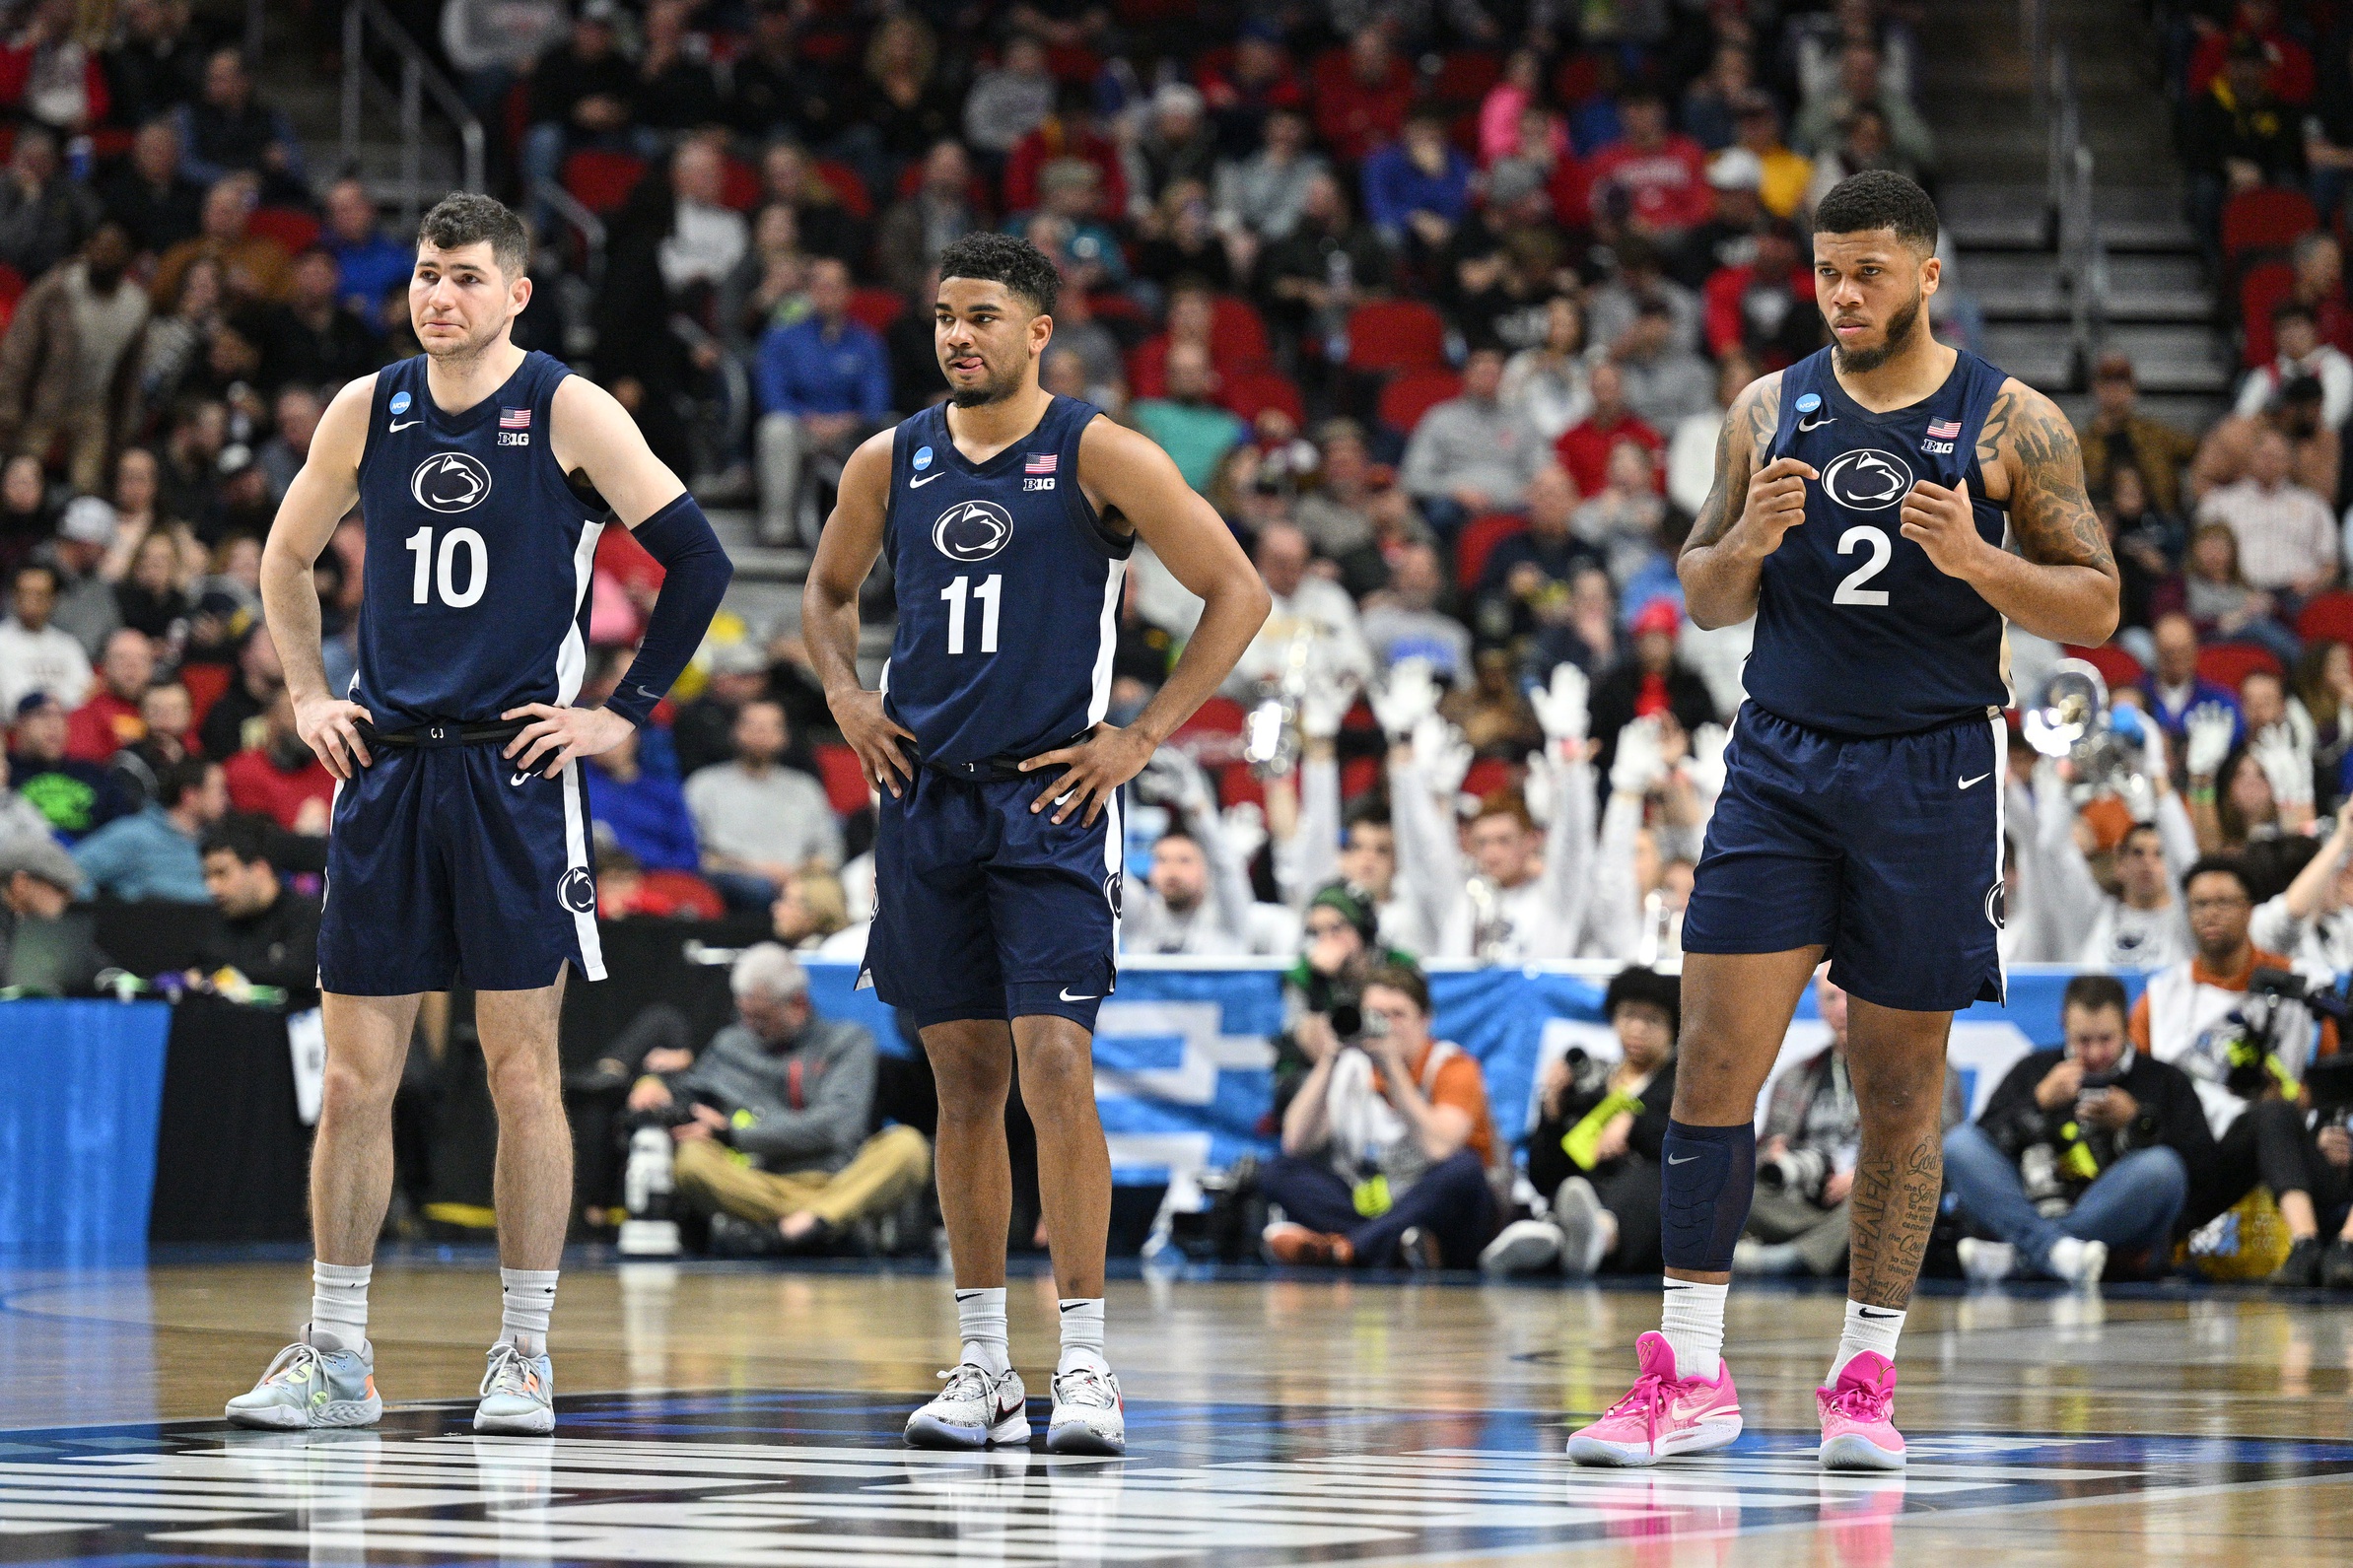 Mar 18, 2023; Des Moines, IA, USA; Penn State Nittany Lions guard Andrew Funk (10) and guard Camren Wynter (11) and guard Myles Dread (2) look on during the first half against the Texas Longhorns at Wells Fargo Arena. Mandatory Credit: Jeffrey Becker-USA TODAY Sports